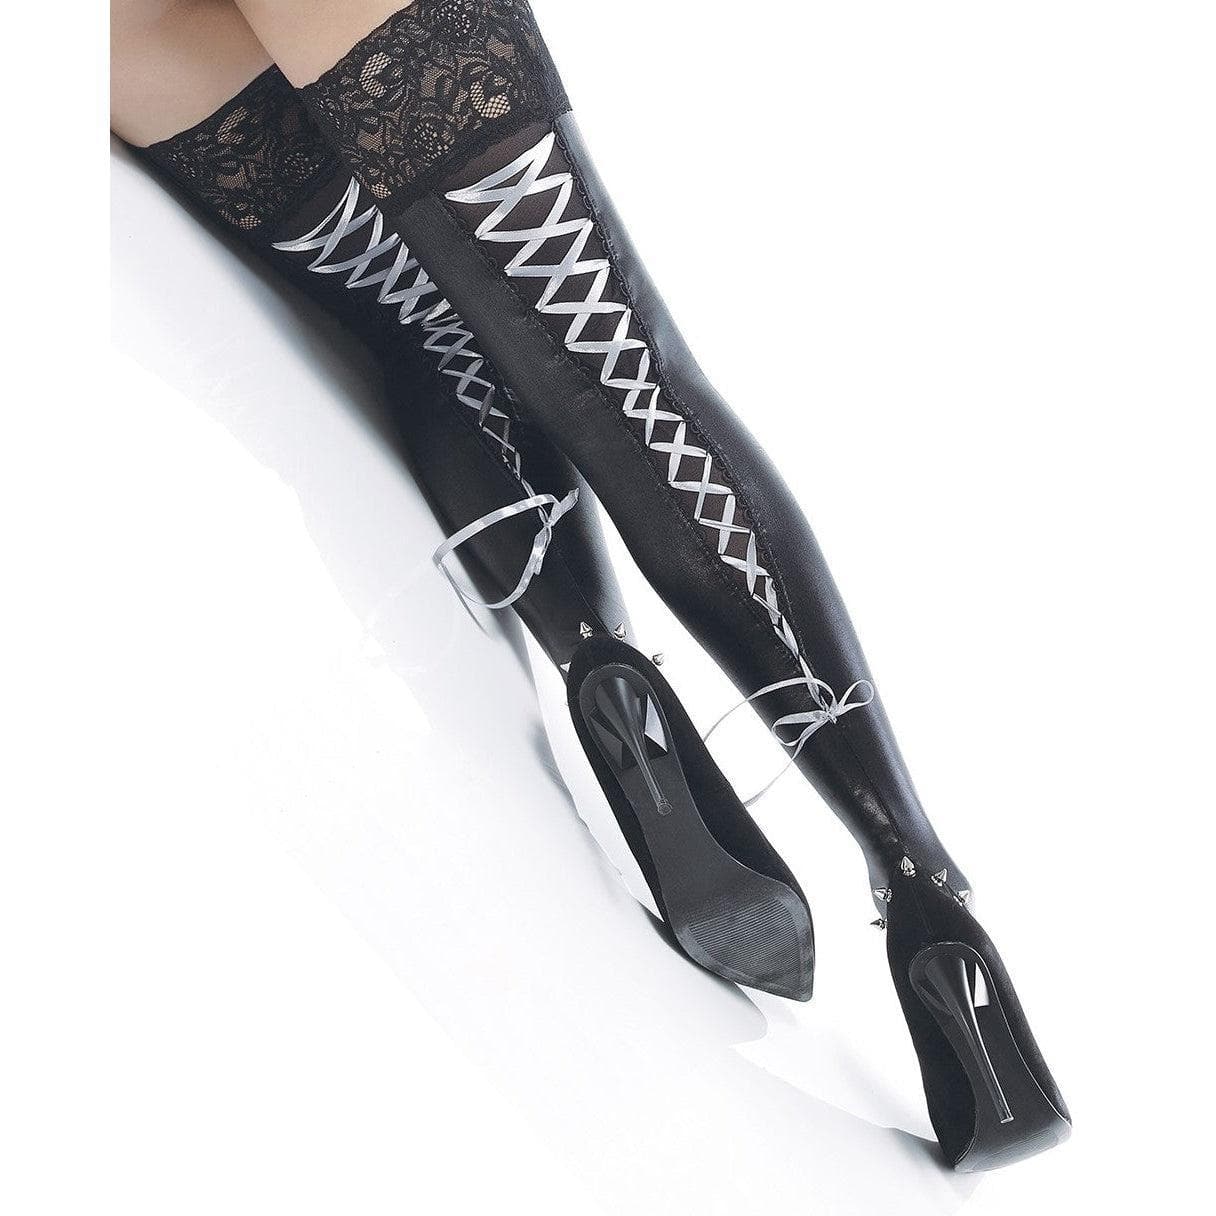 Coquette Thigh High Wetlook Stockings with Contrasting Ribbon Lace-Up Back Seam Detail Black/Silver - Romantic Blessings